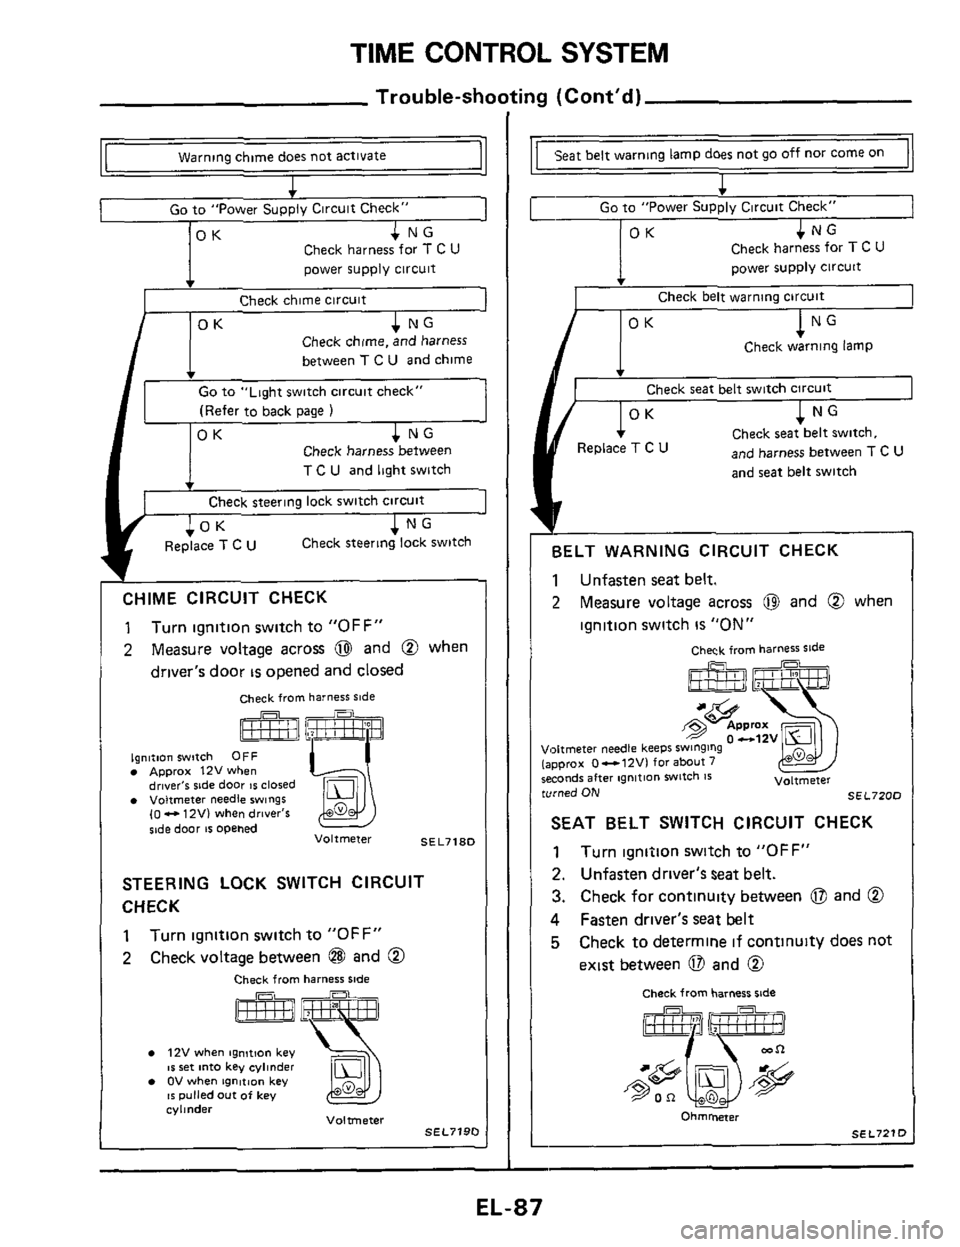 NISSAN 300ZX 1984 Z31 Electrical System Workshop Manual TIME CONTROL SYSTEM 
Trouble-shooting (Contd) 
CHIME CIRCUIT  CHECK 
1 
2 
Turn ignition  switch to "OFF" 
Measure  voltage across @ and @ when 
drivers  door 
is opened and closed 
Check  from harn